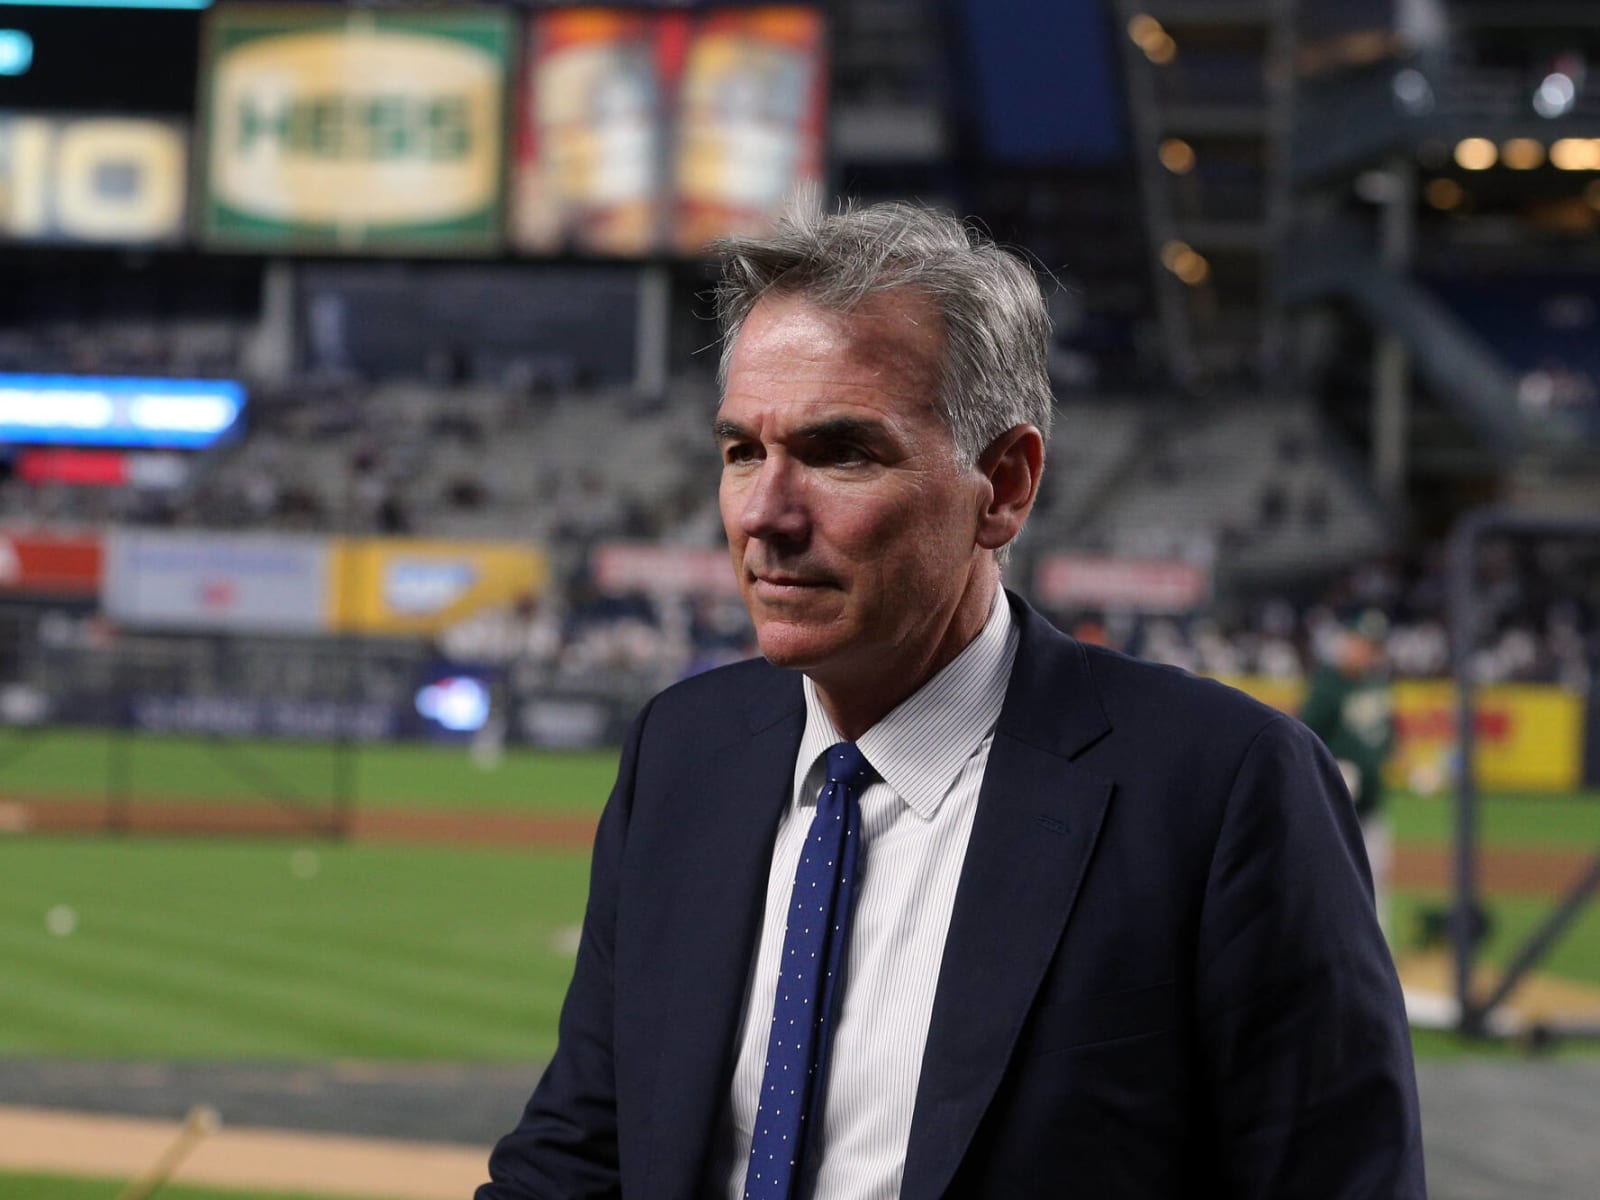 Billy Beane can't get enough of soccer after revolutionising baseball, Oakland Athletics